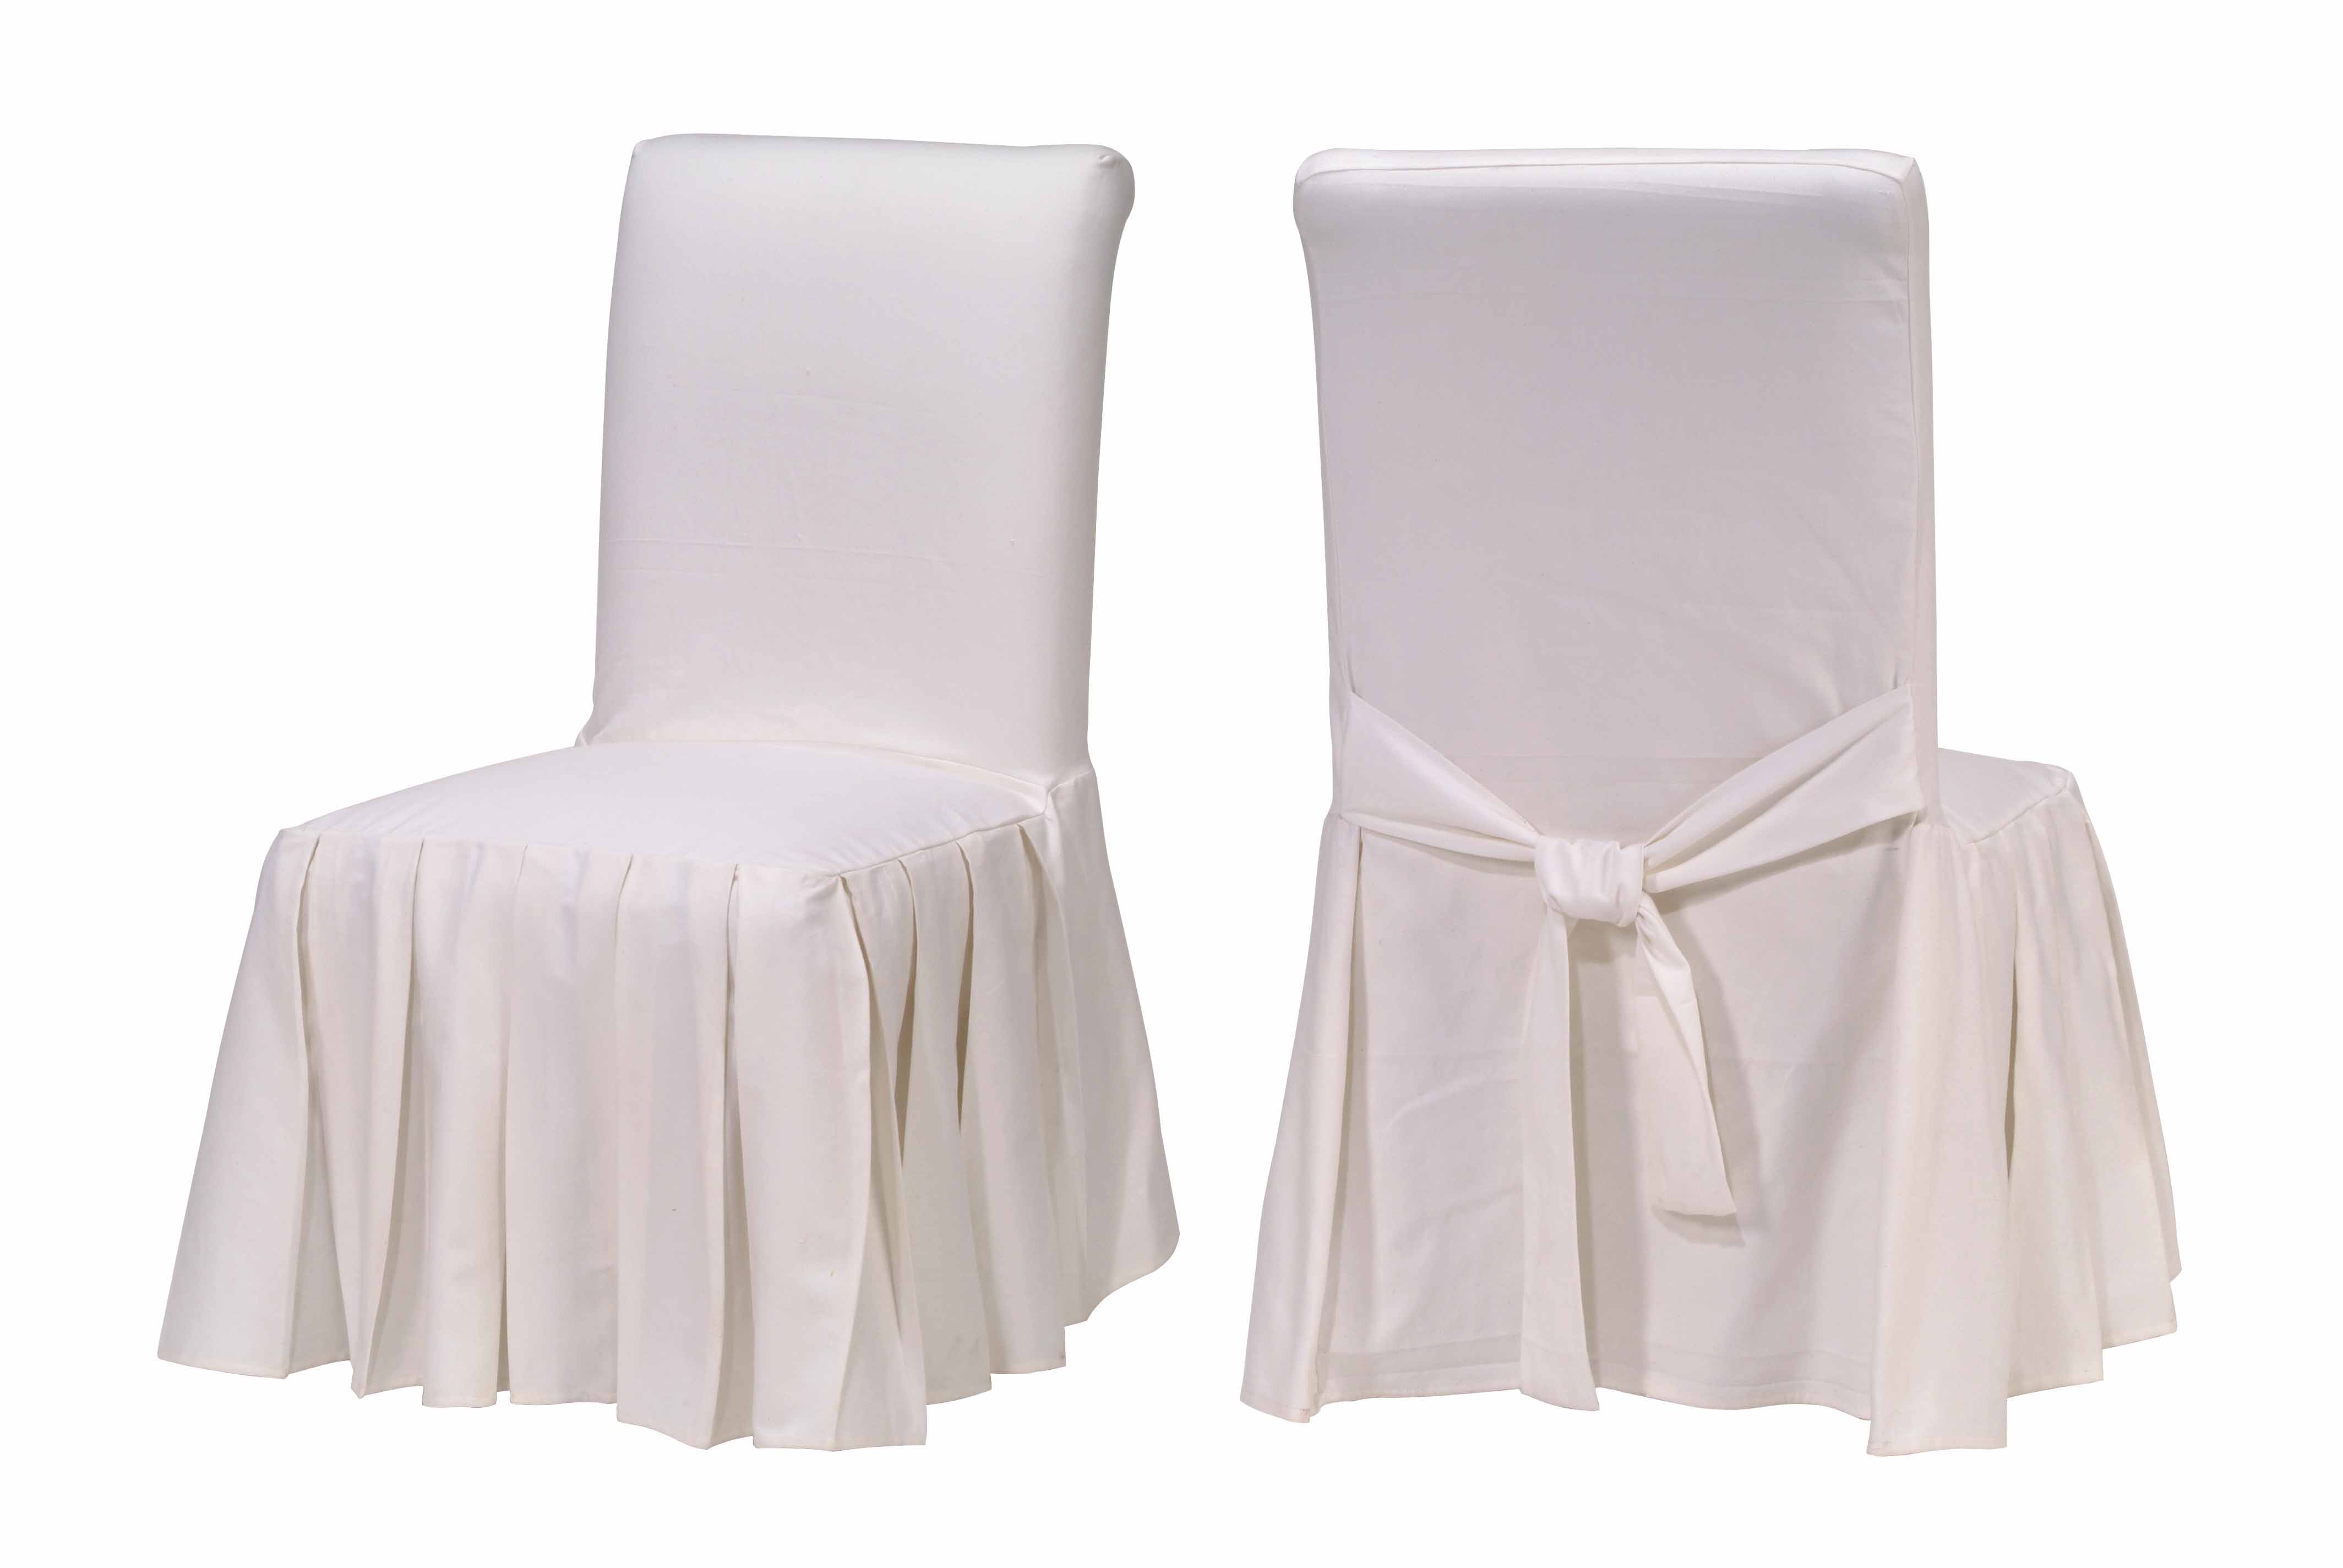 White Linen Dining Room Chair Covers